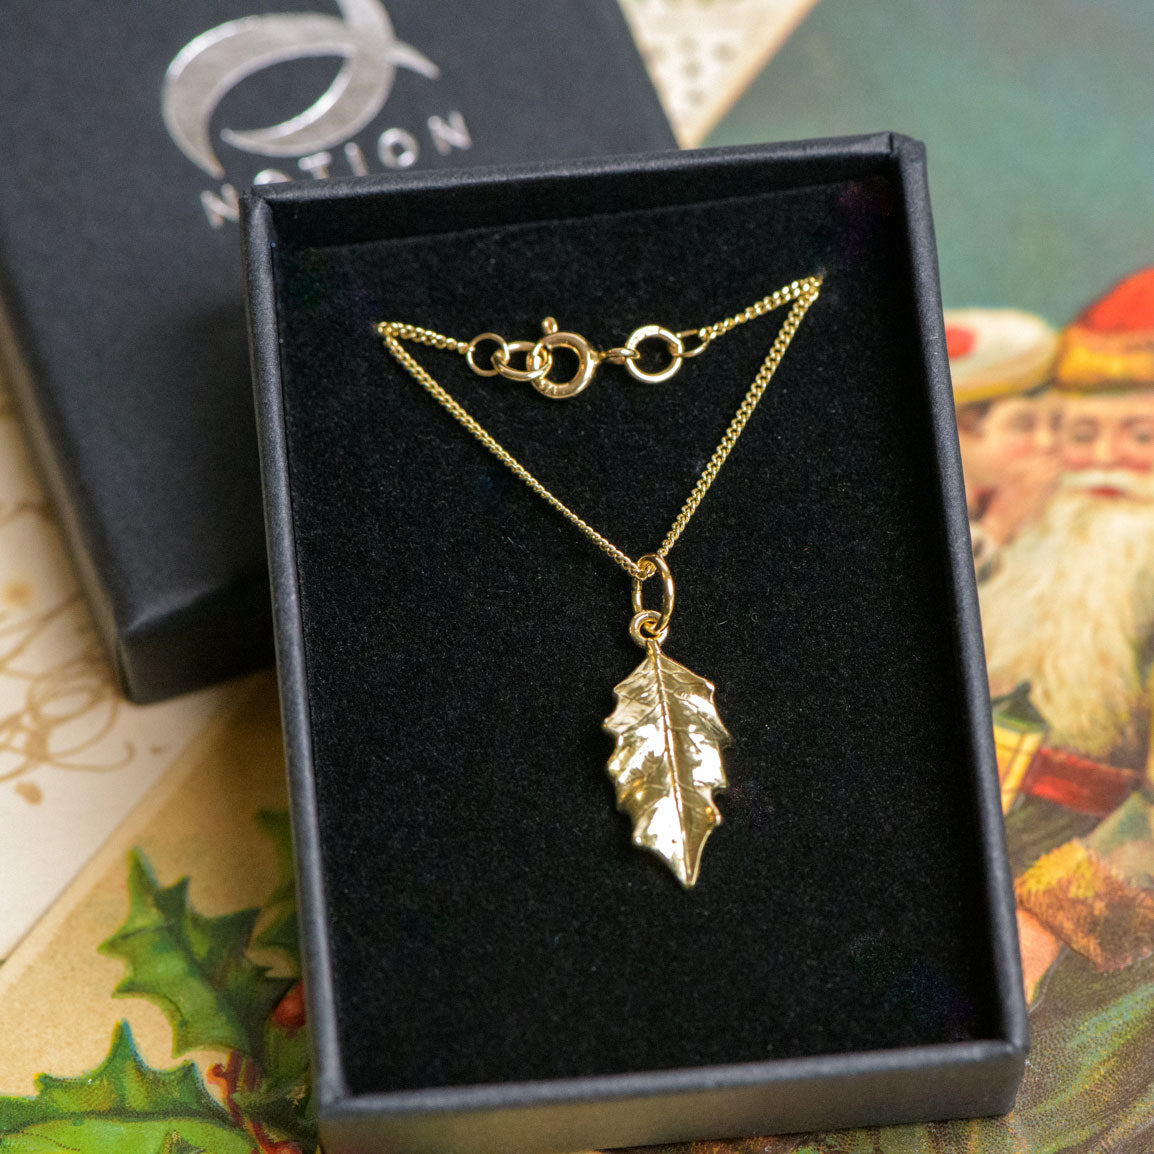 9ct gold leaf pendant cast from a holly leaf 